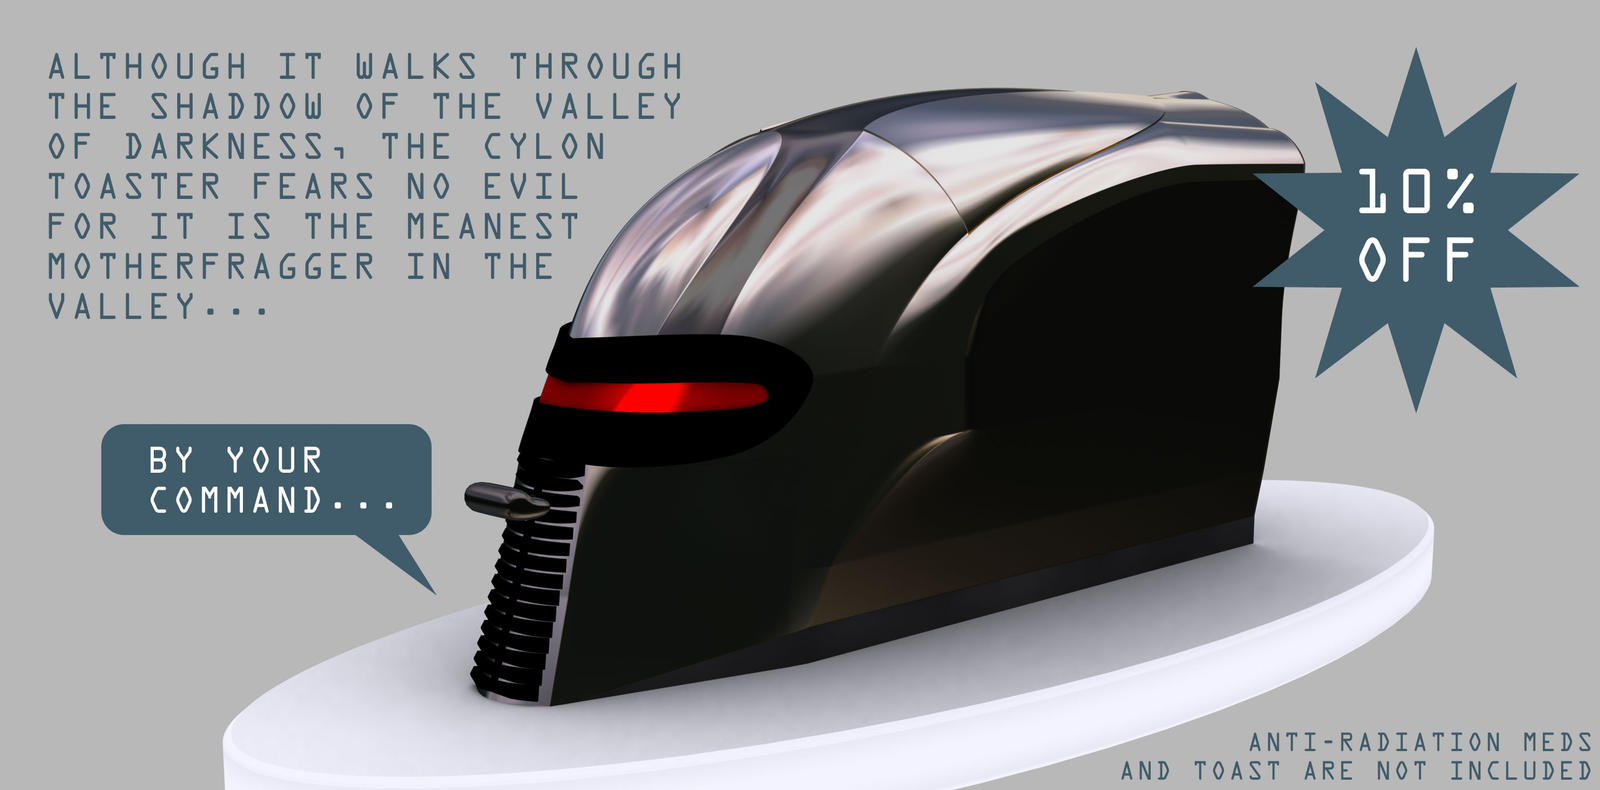 The first Cylon Toaster render